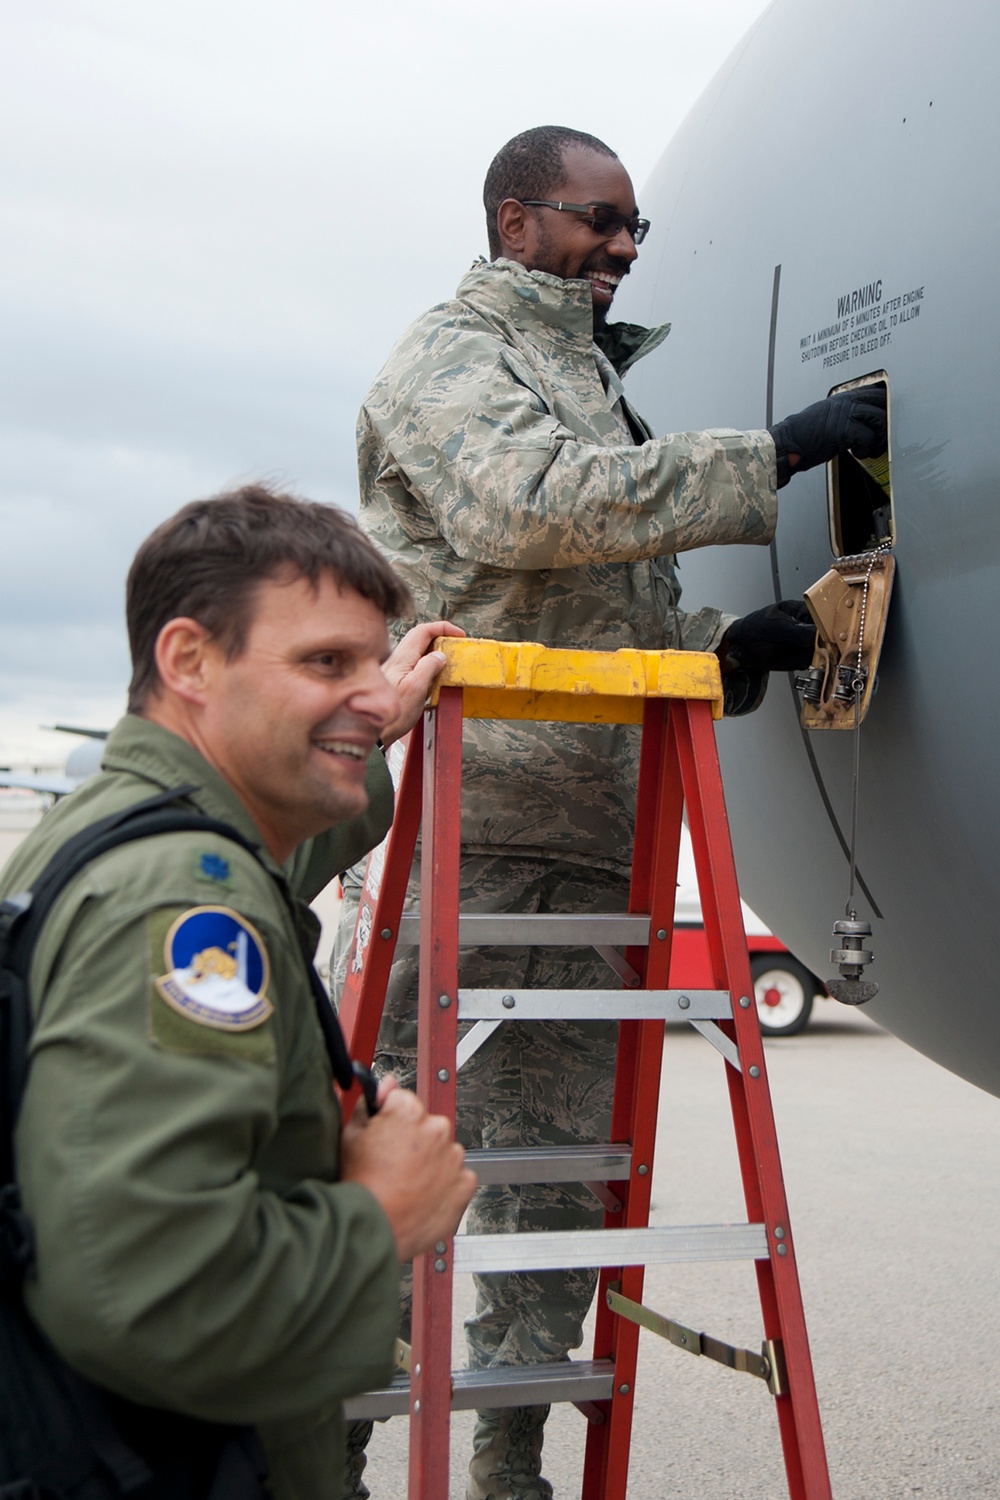 Refueling Wing Linchpin to Allied Training